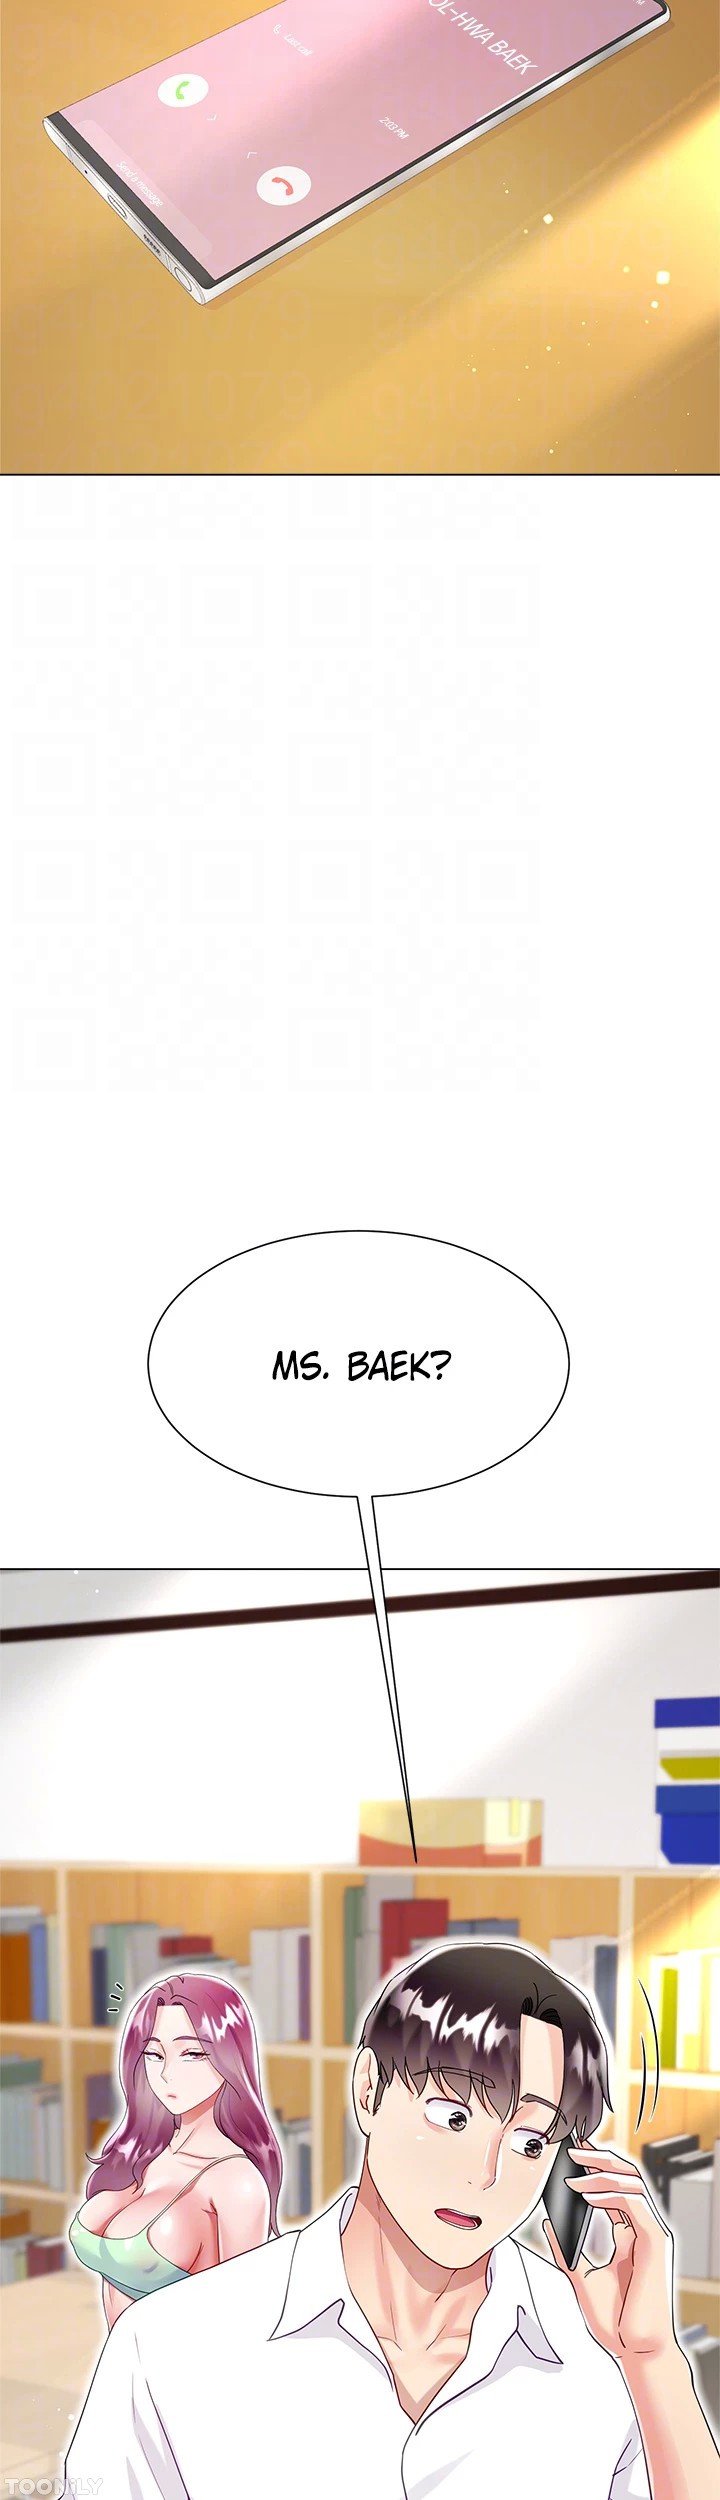 my-sister-in-laws-skirt-chap-45-39